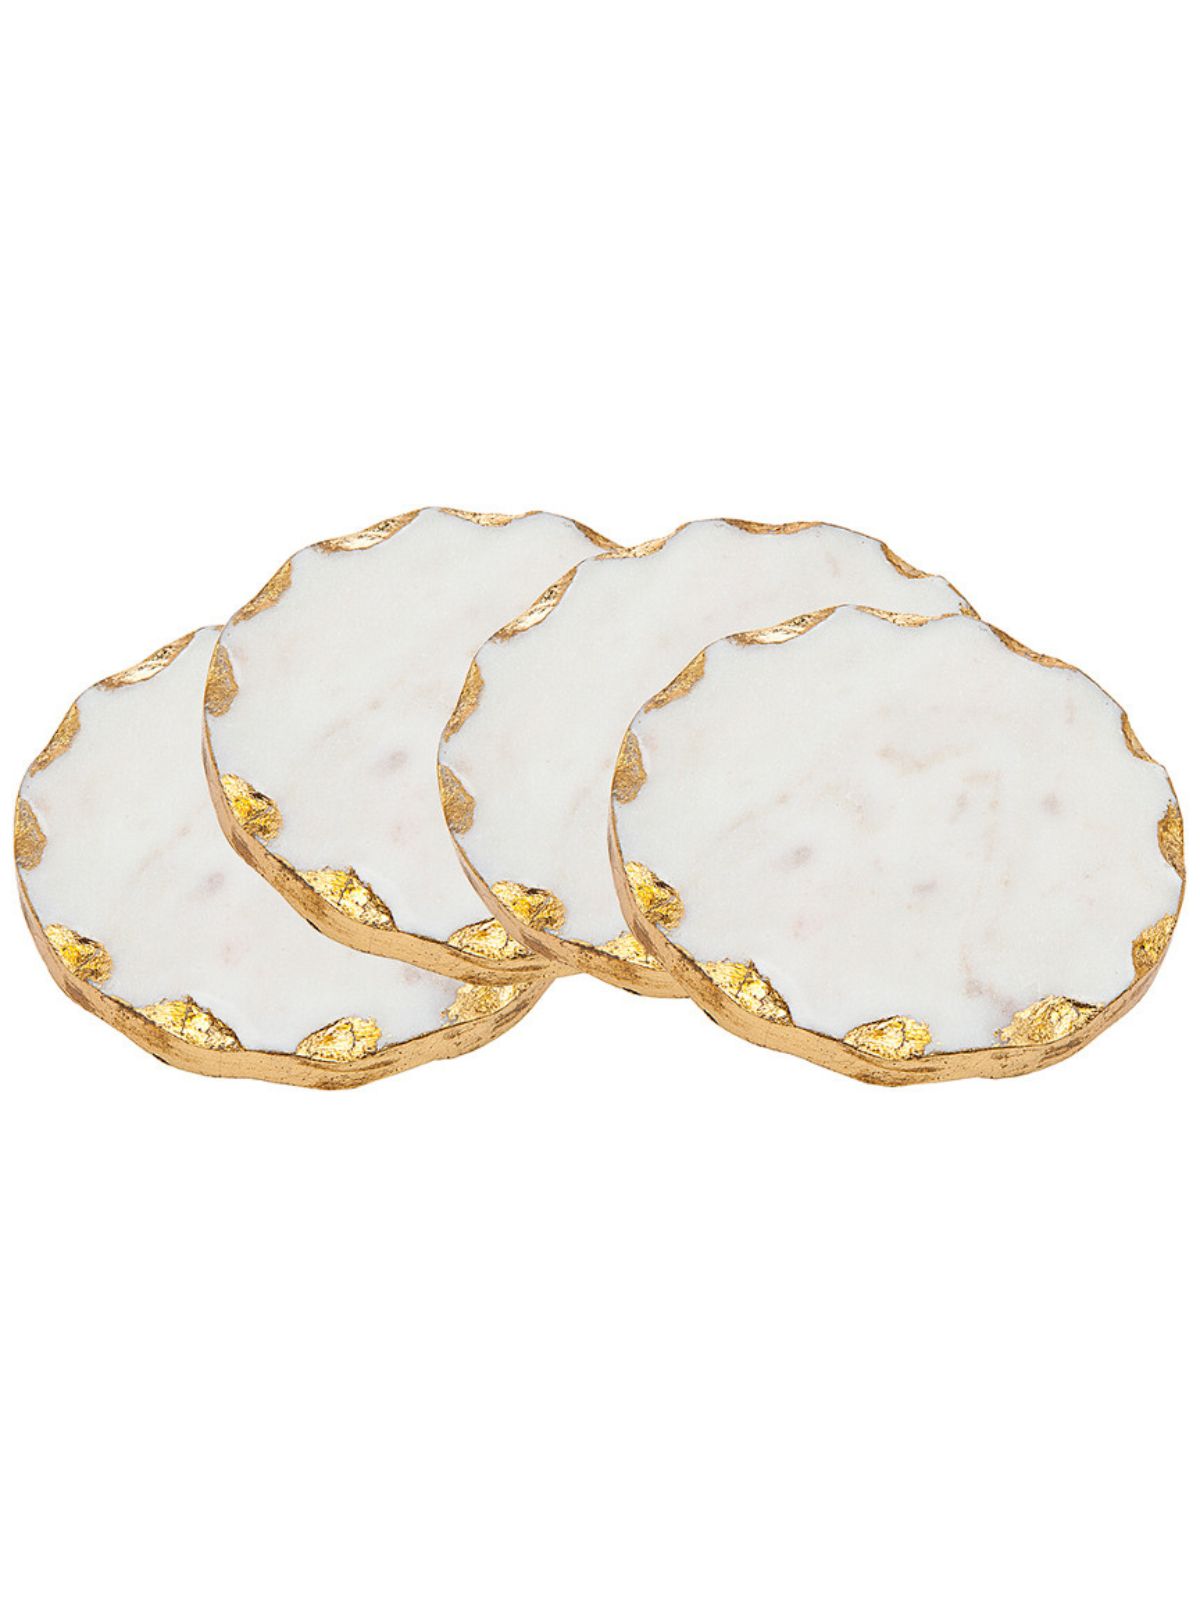 Set of 4 Gold Edge Round Marble Coasters sold by KYA Home Decor.